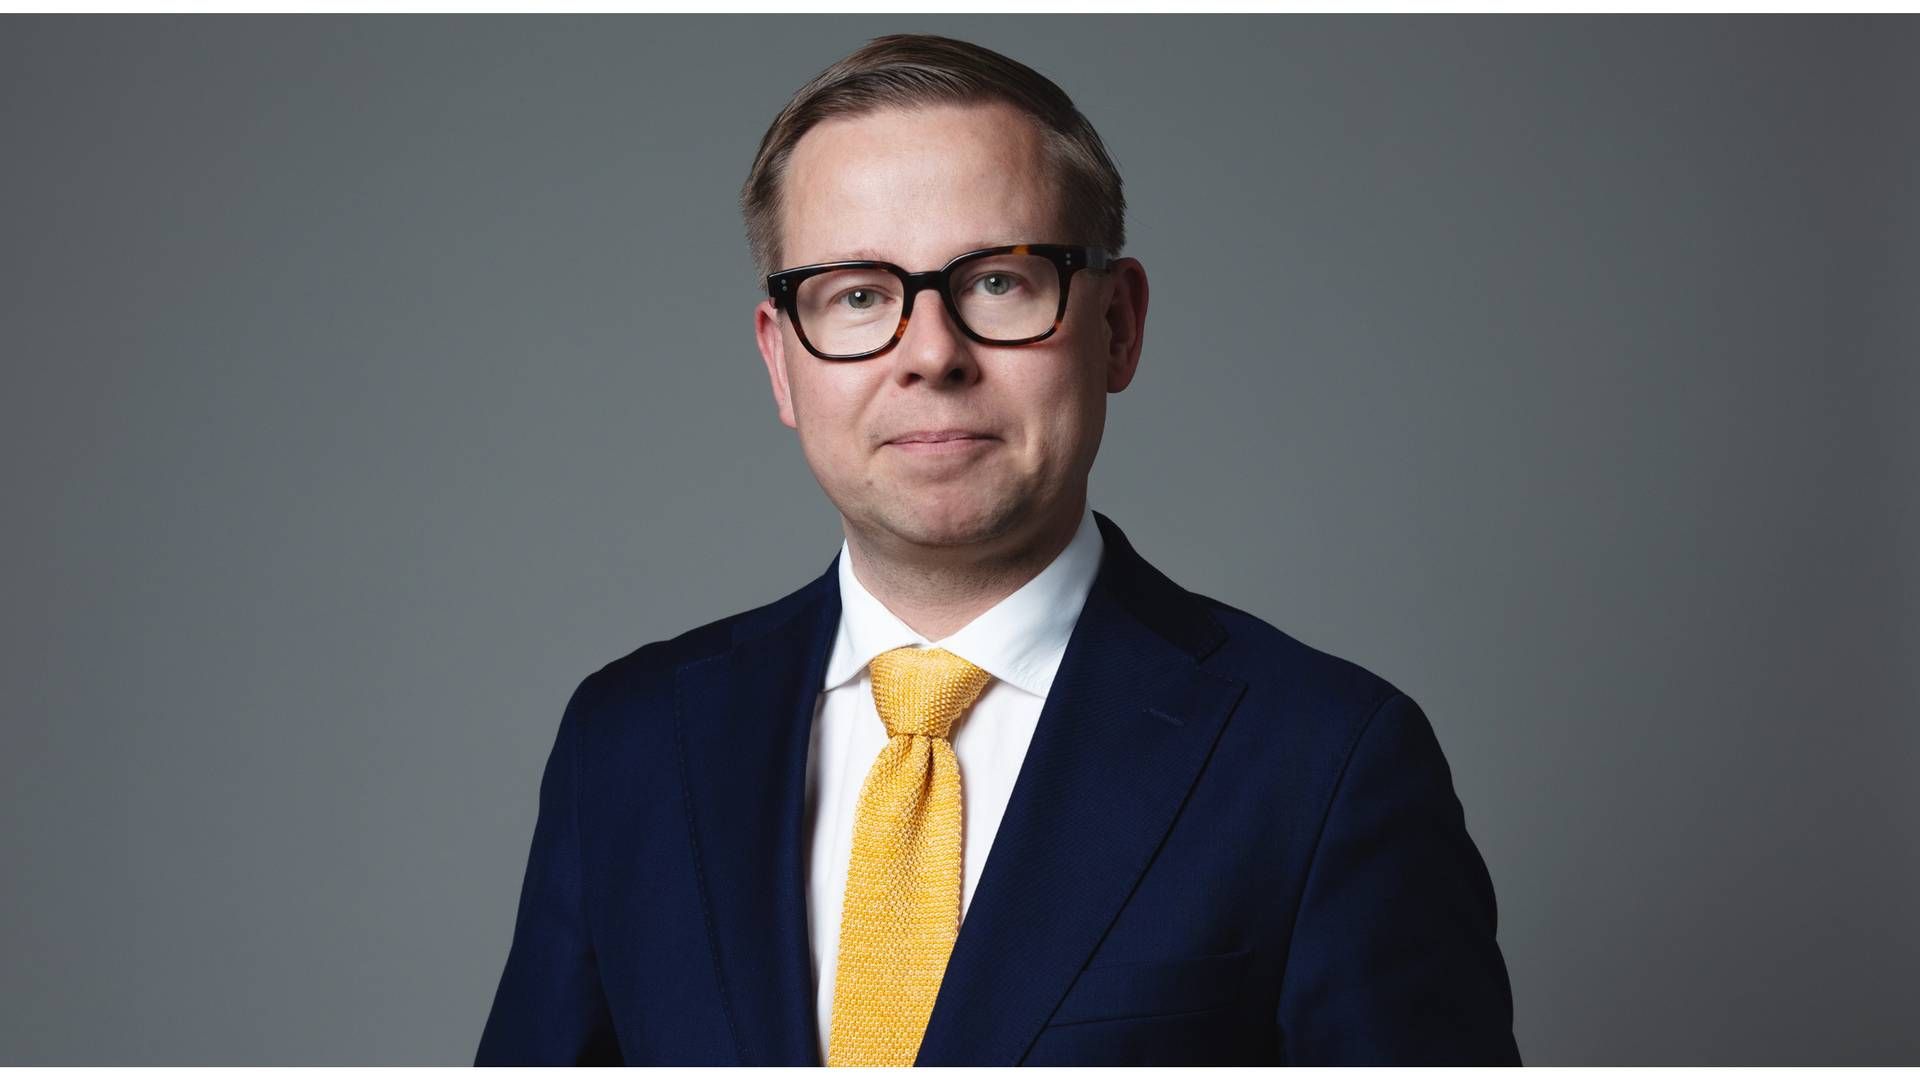 Ilkka Tomperi, partner and chief operating officer at Capman Real Estate. | Photo: PR / Capman